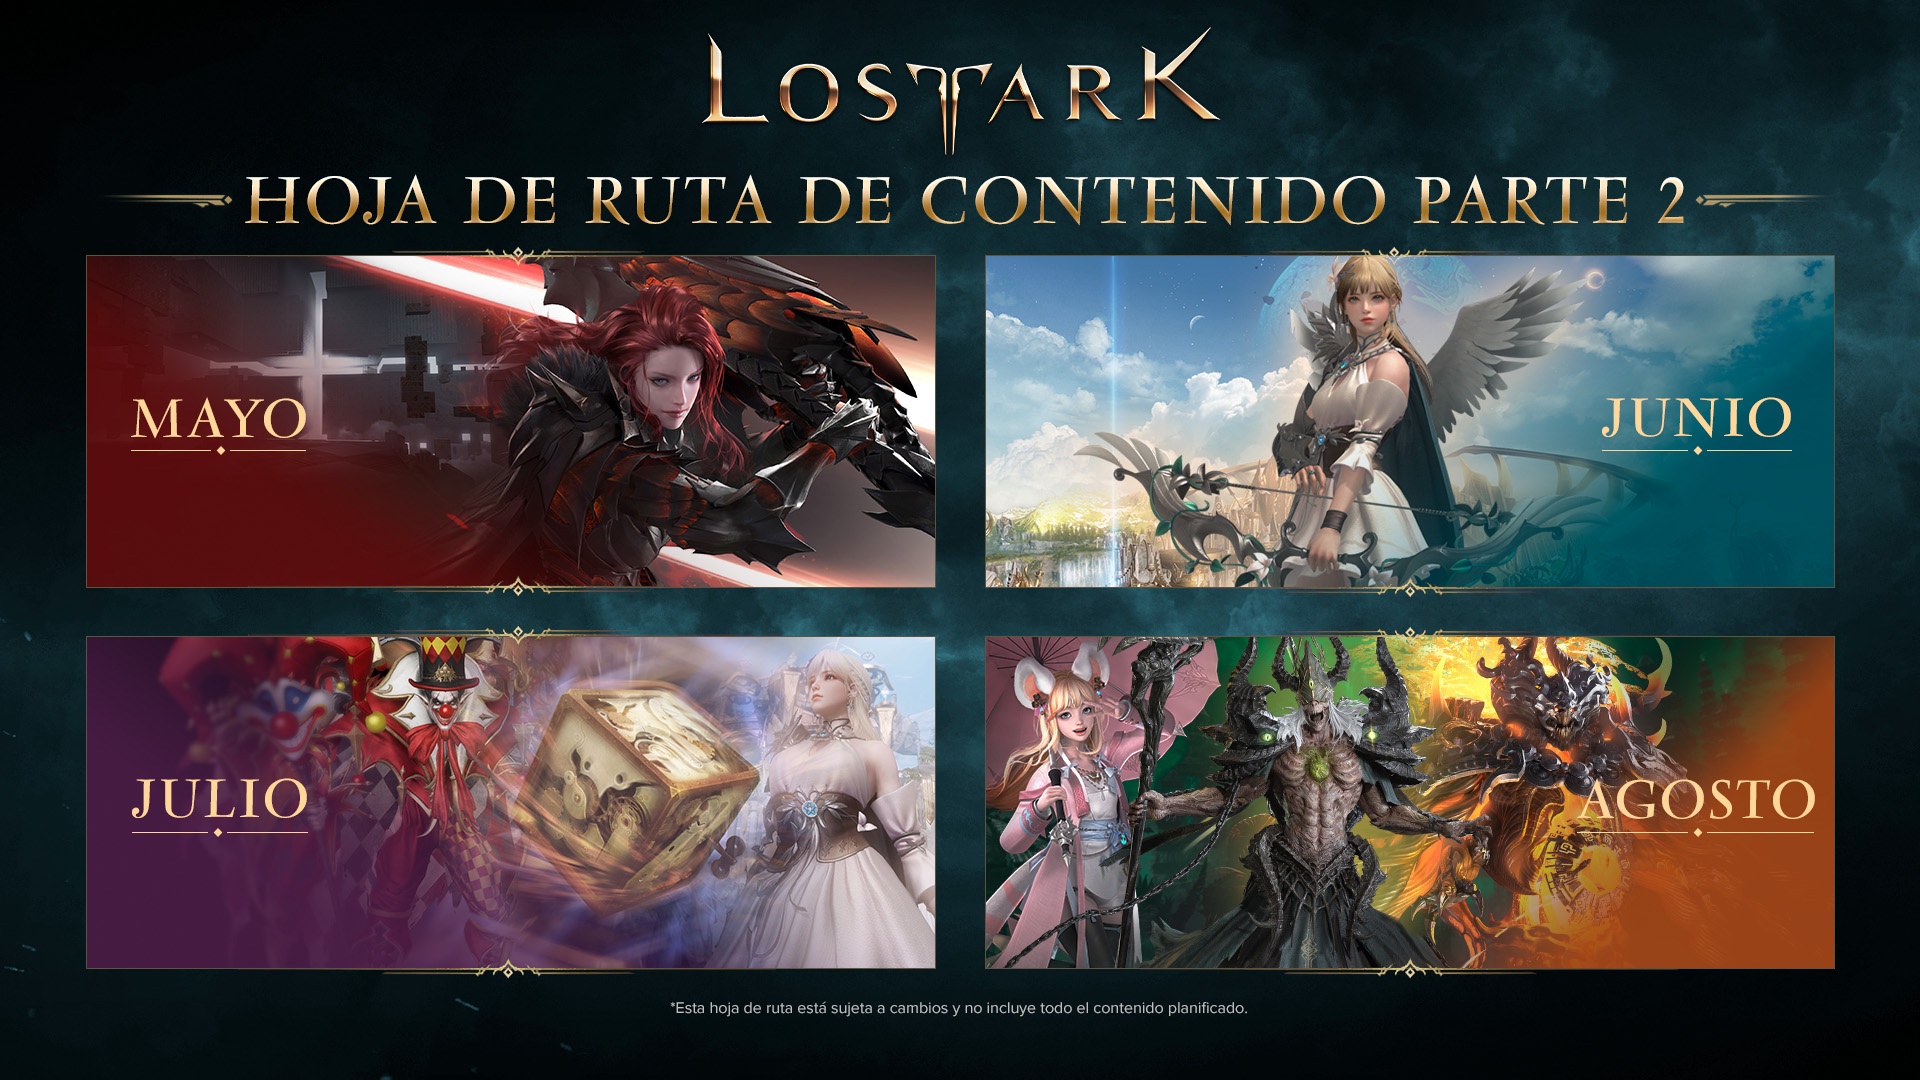 These are the news coming to Lost Ark in the coming months